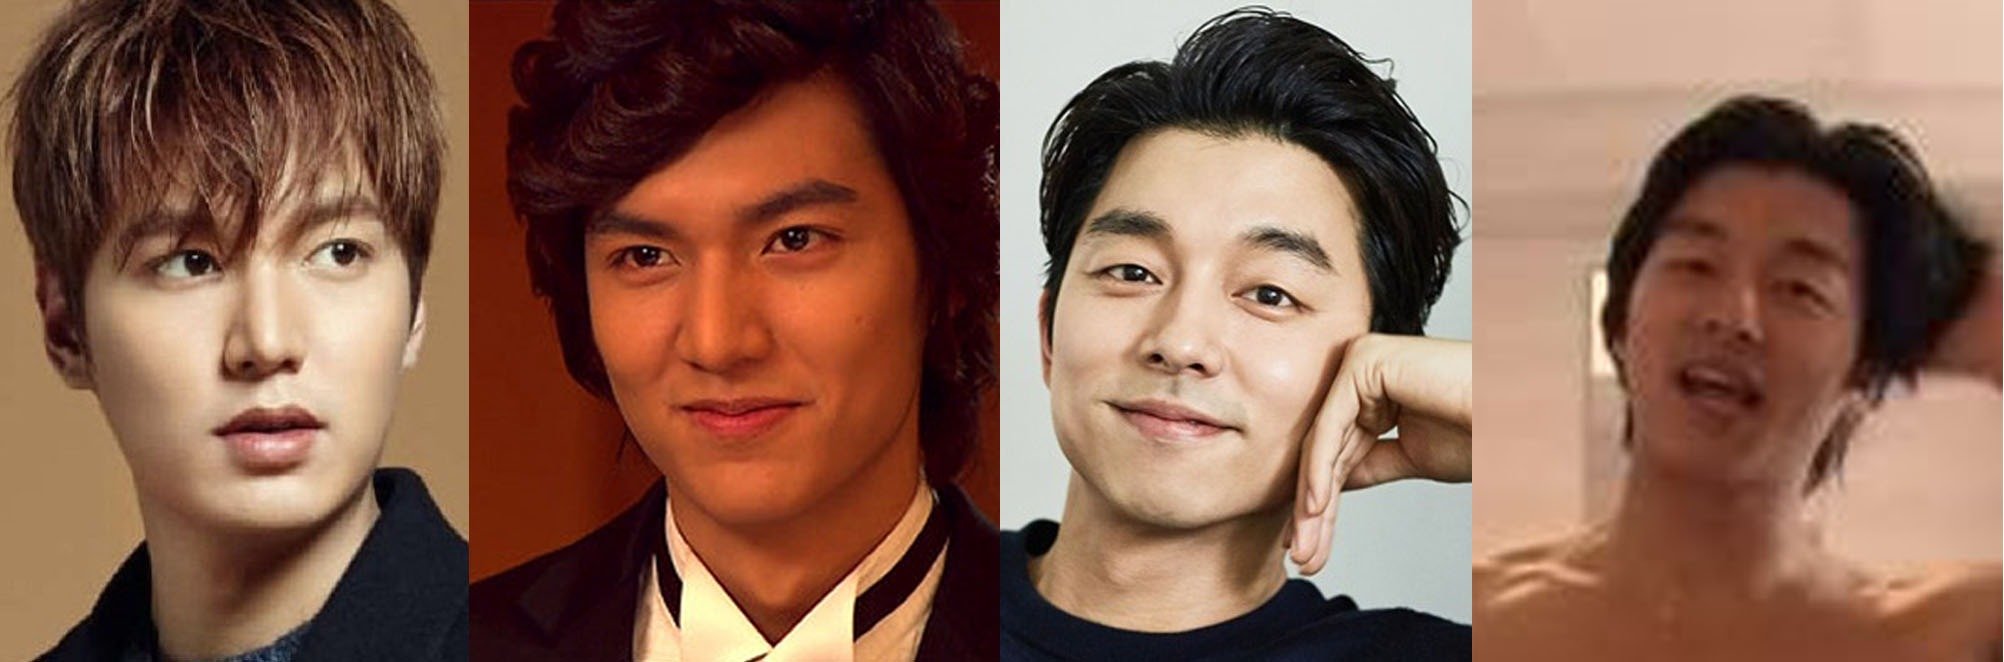 Lee Min-ho in 'Boys Over Flowers,' Gong Yoo in 'Coffee Prince' and the other K-drama stars' breakout roles